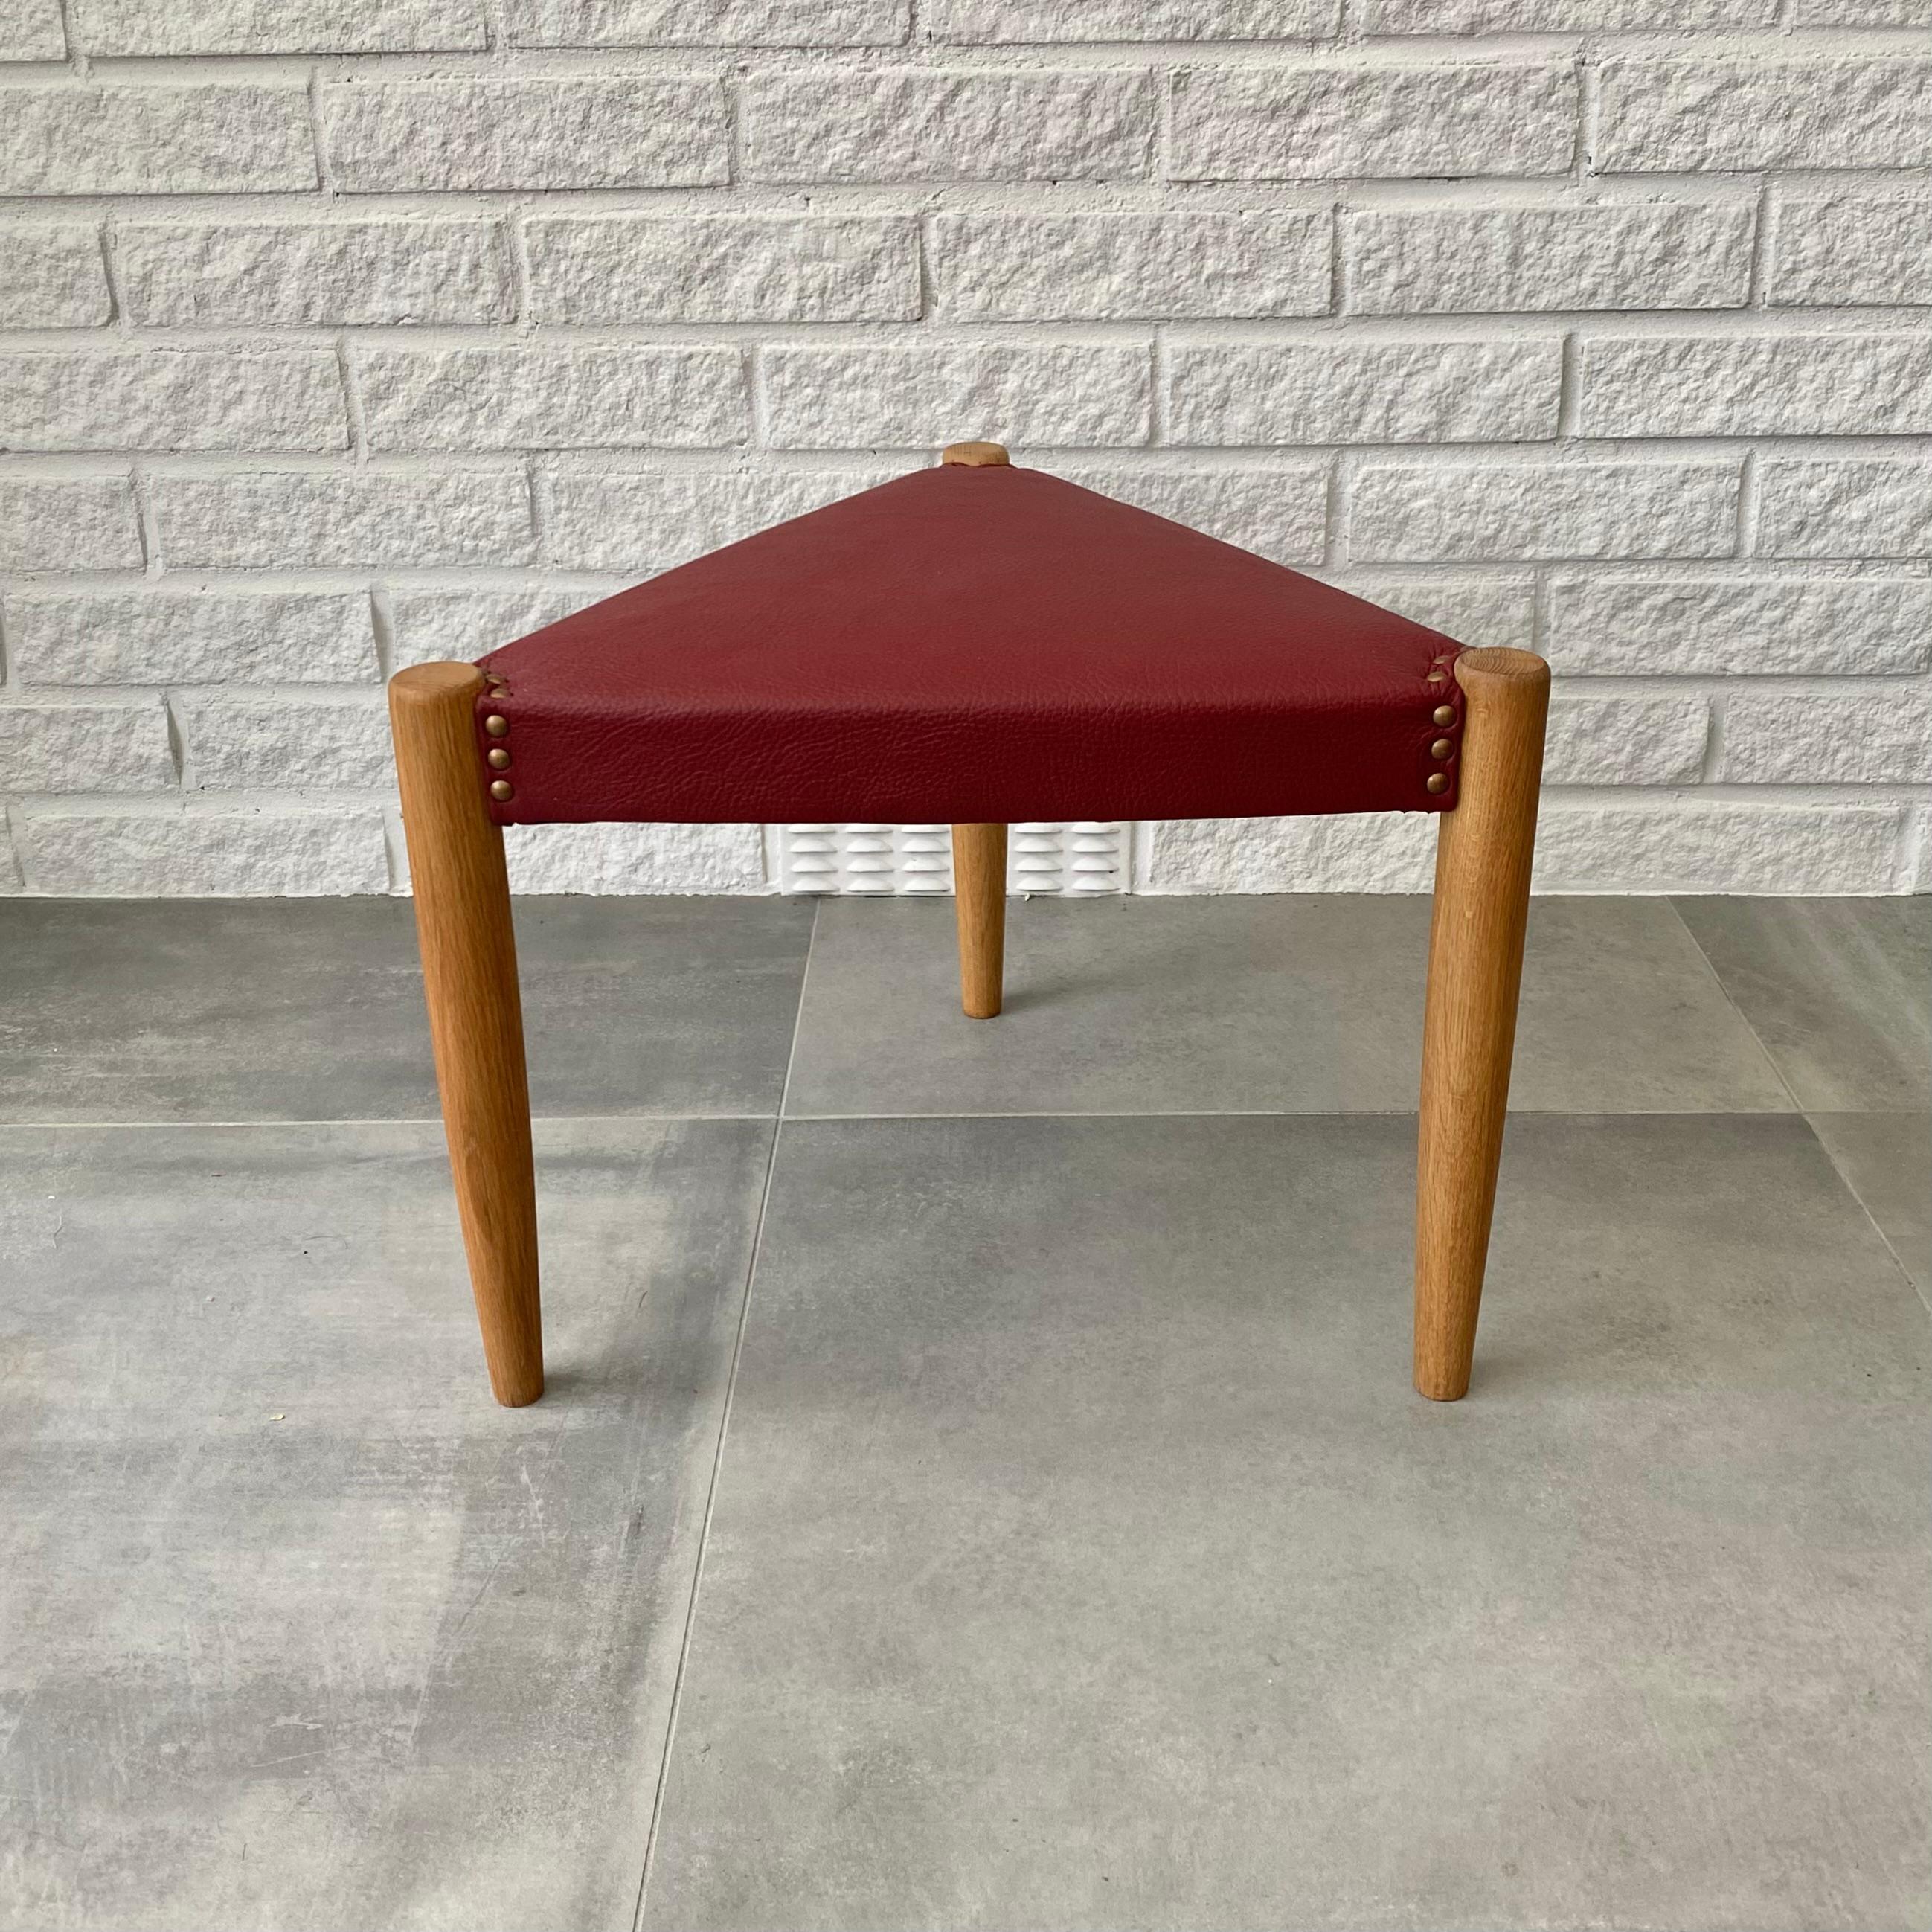 Scandinavian mid-century stool made from solid oak with a triangular seat upholstered in red leather. Decorative brass rivets surrounding the top of each of the three leg. Designed and produced by an unidentified Swedish manufacturer in the 1960s.